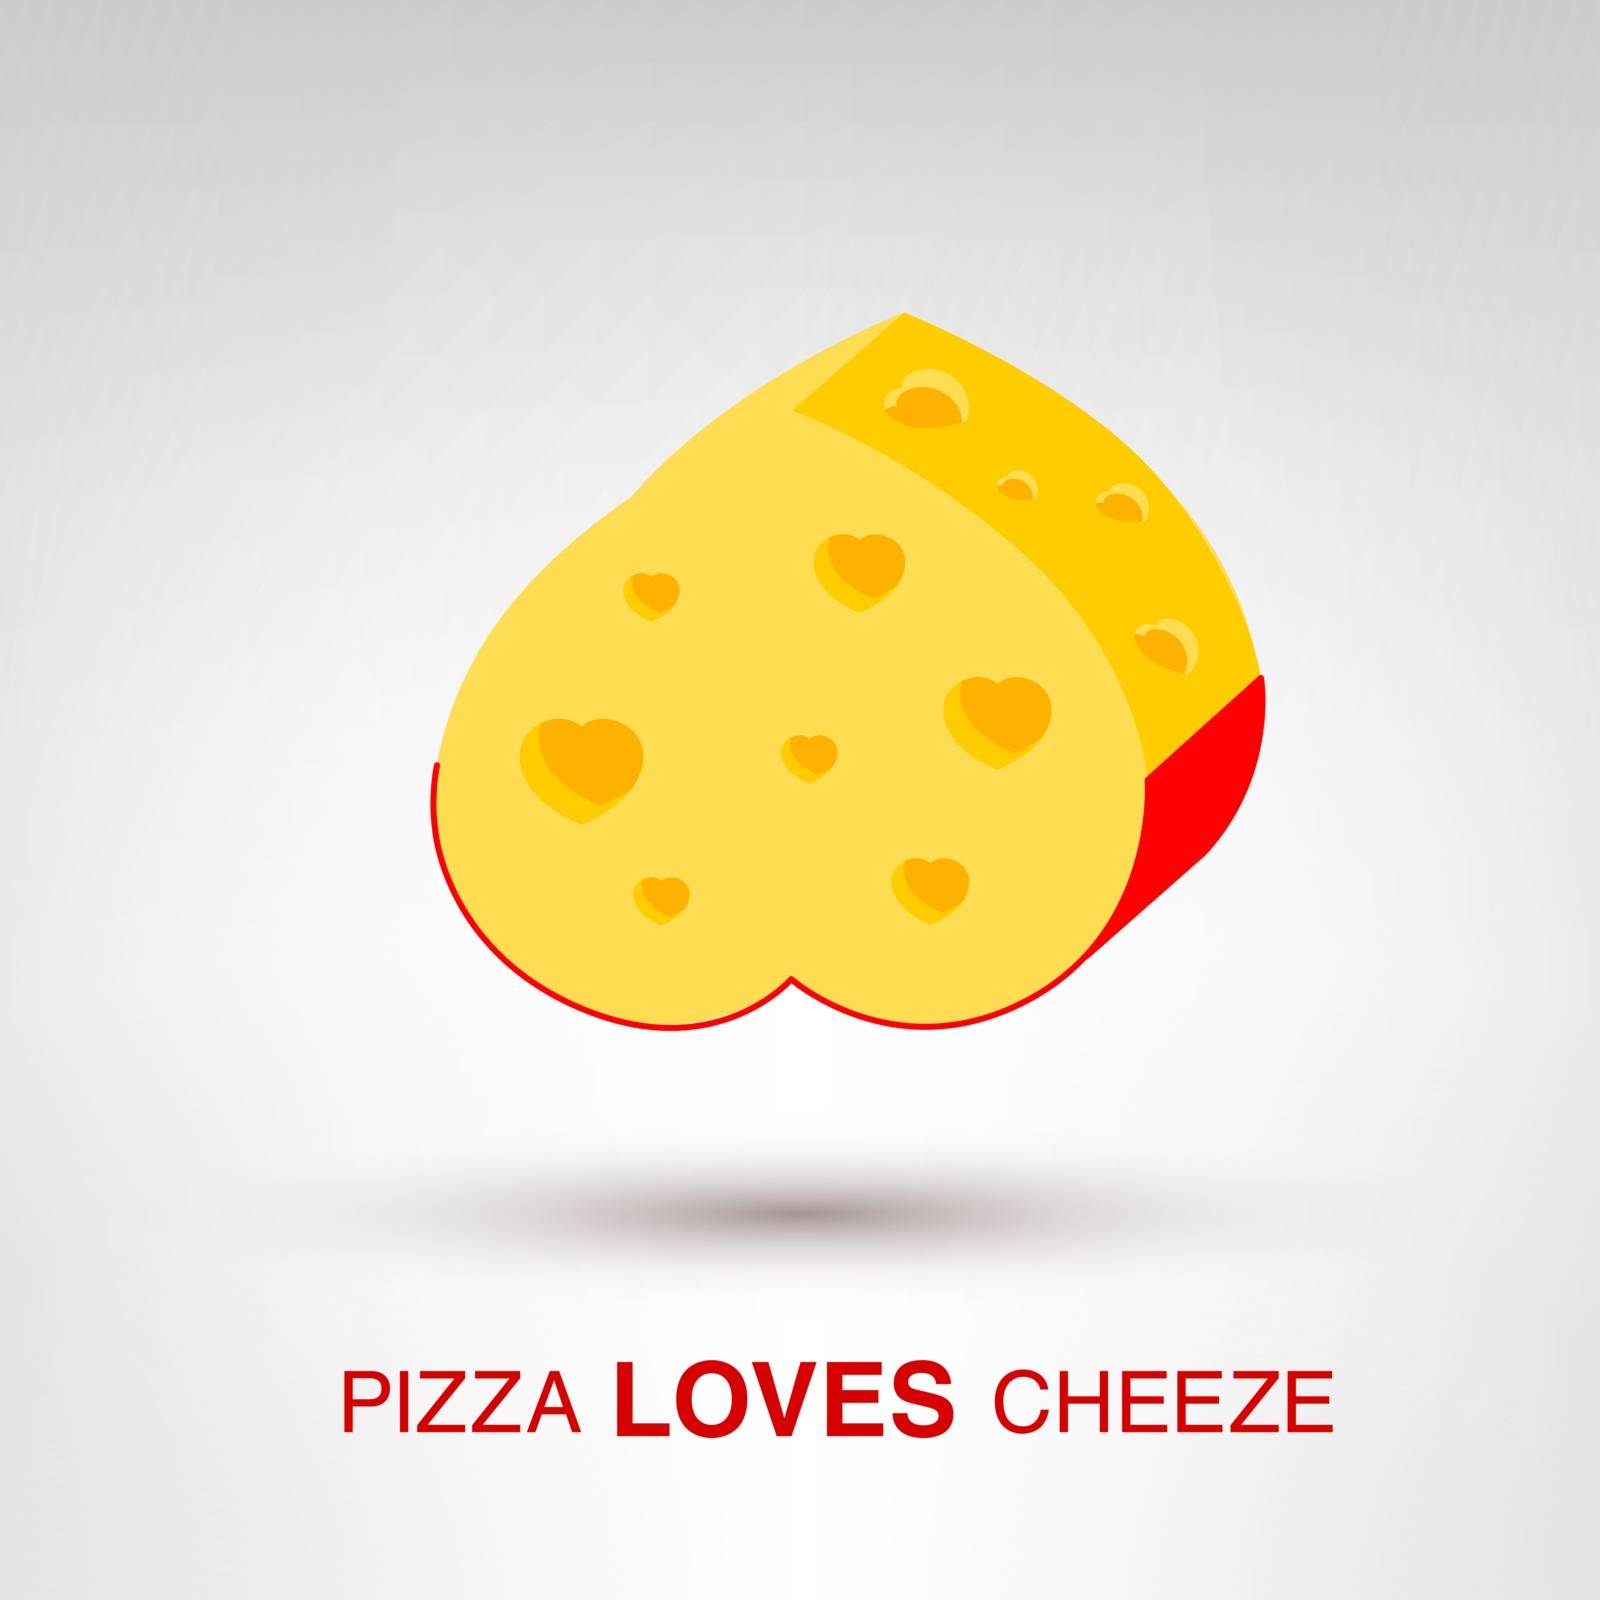 Pizza Loves Cheeze by Whitebarbie